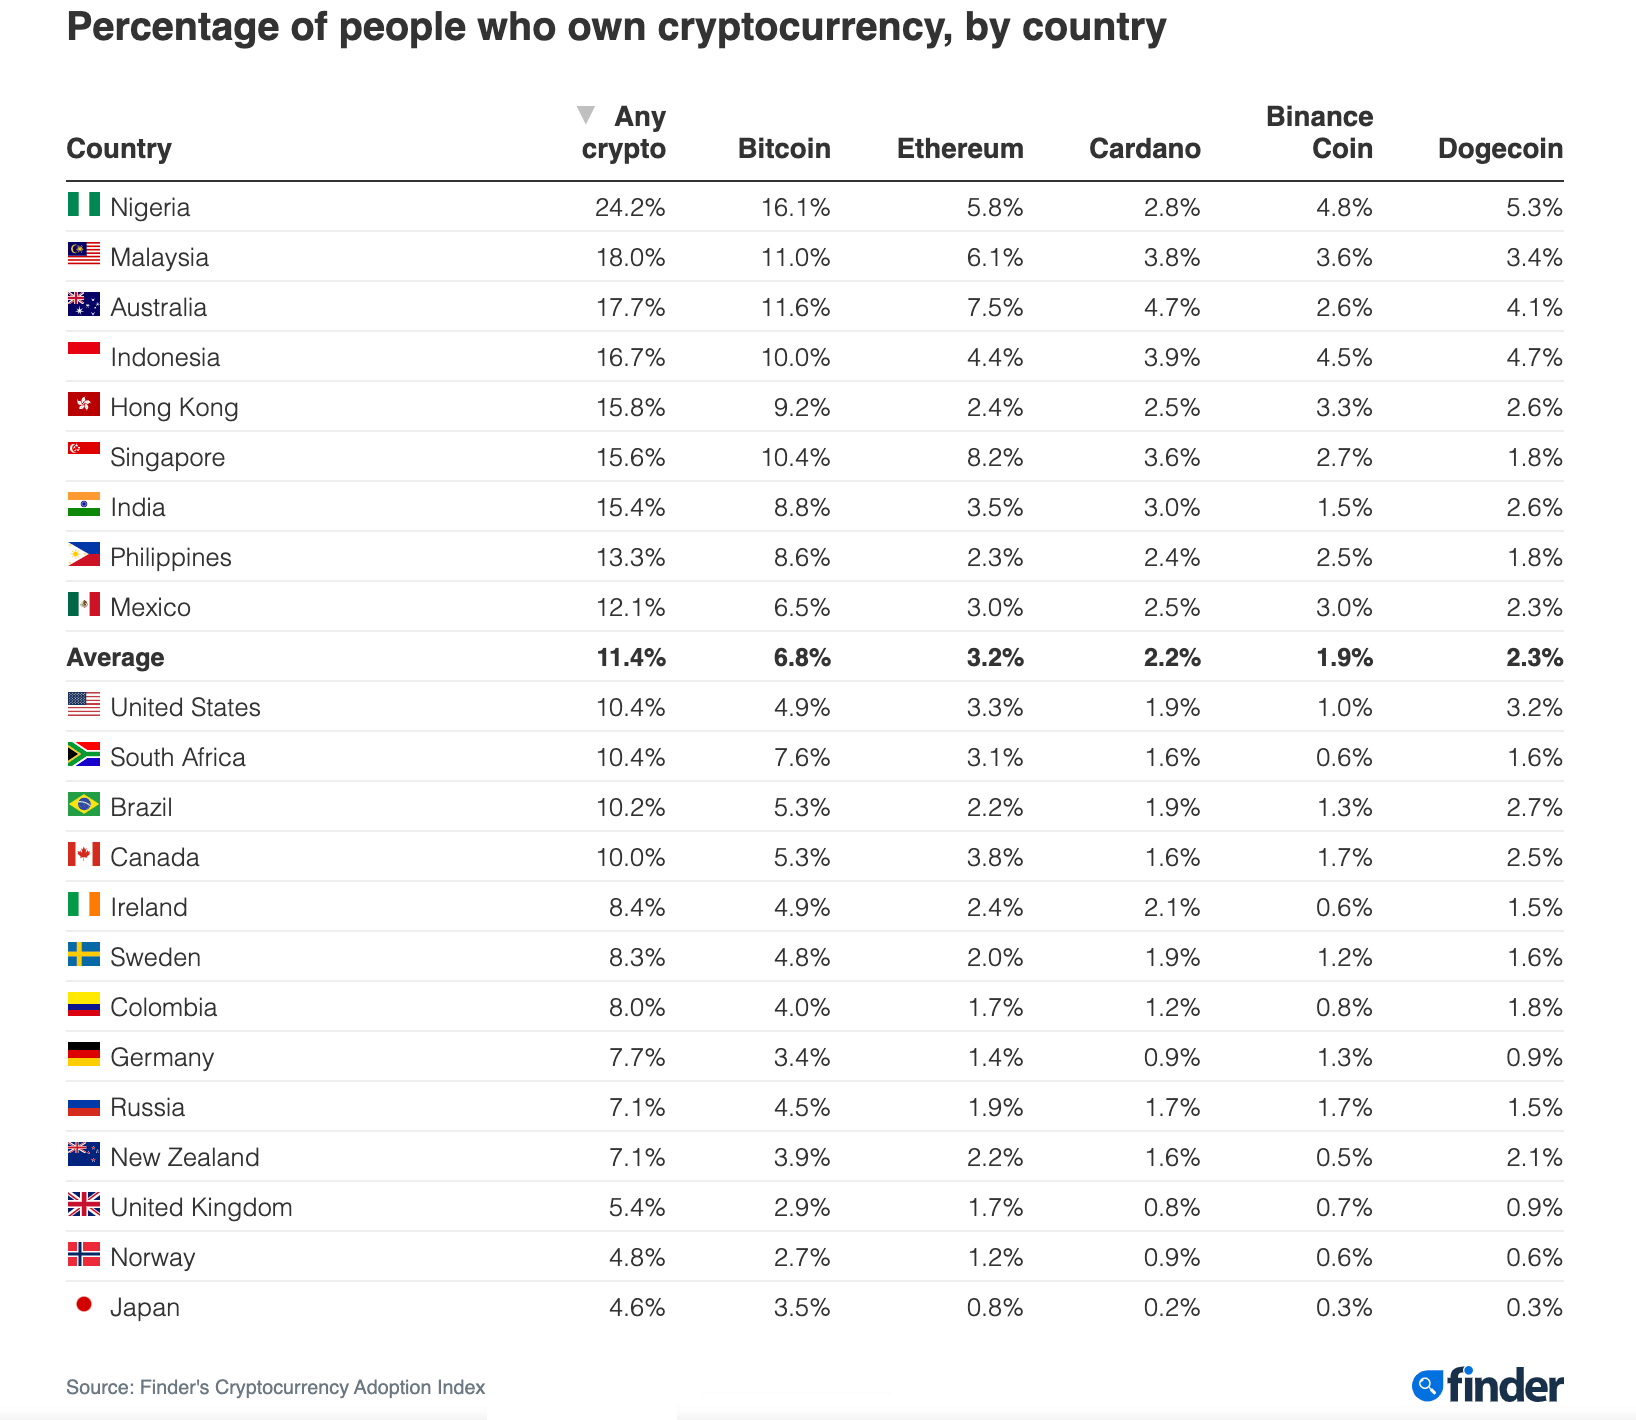 Percentage of people who own cryptocurrencies by country.  Source: Finder